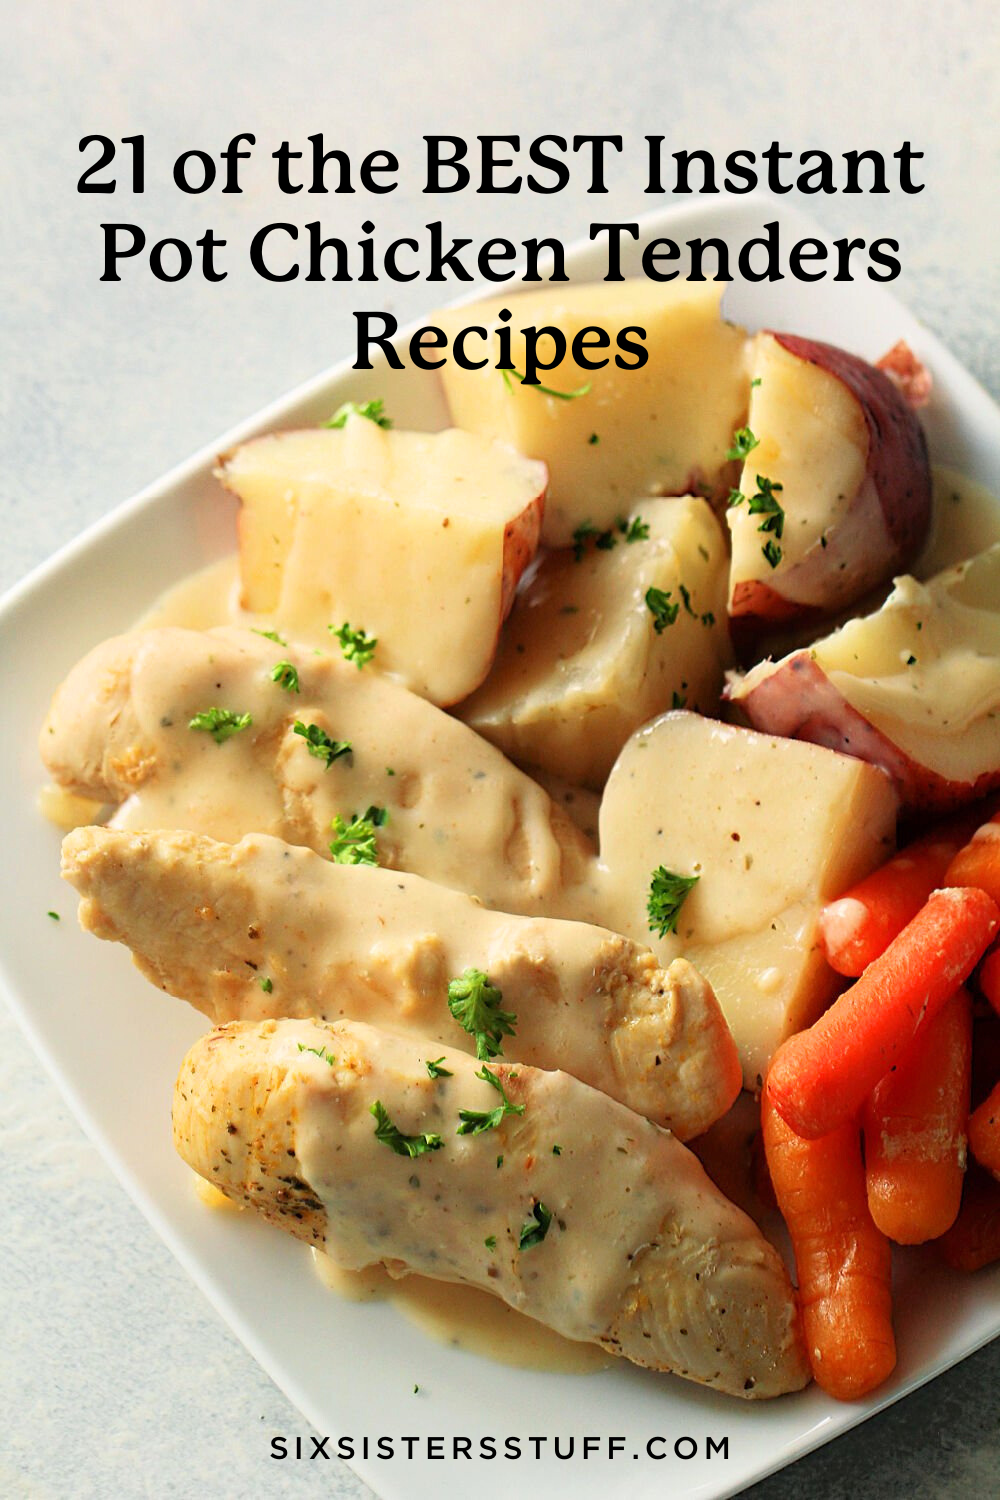 https://www.sixsistersstuff.com/wp-content/uploads/2023/09/21-of-the-BEST-Instant-Pot-Chicken-Tenders-Recipes.png